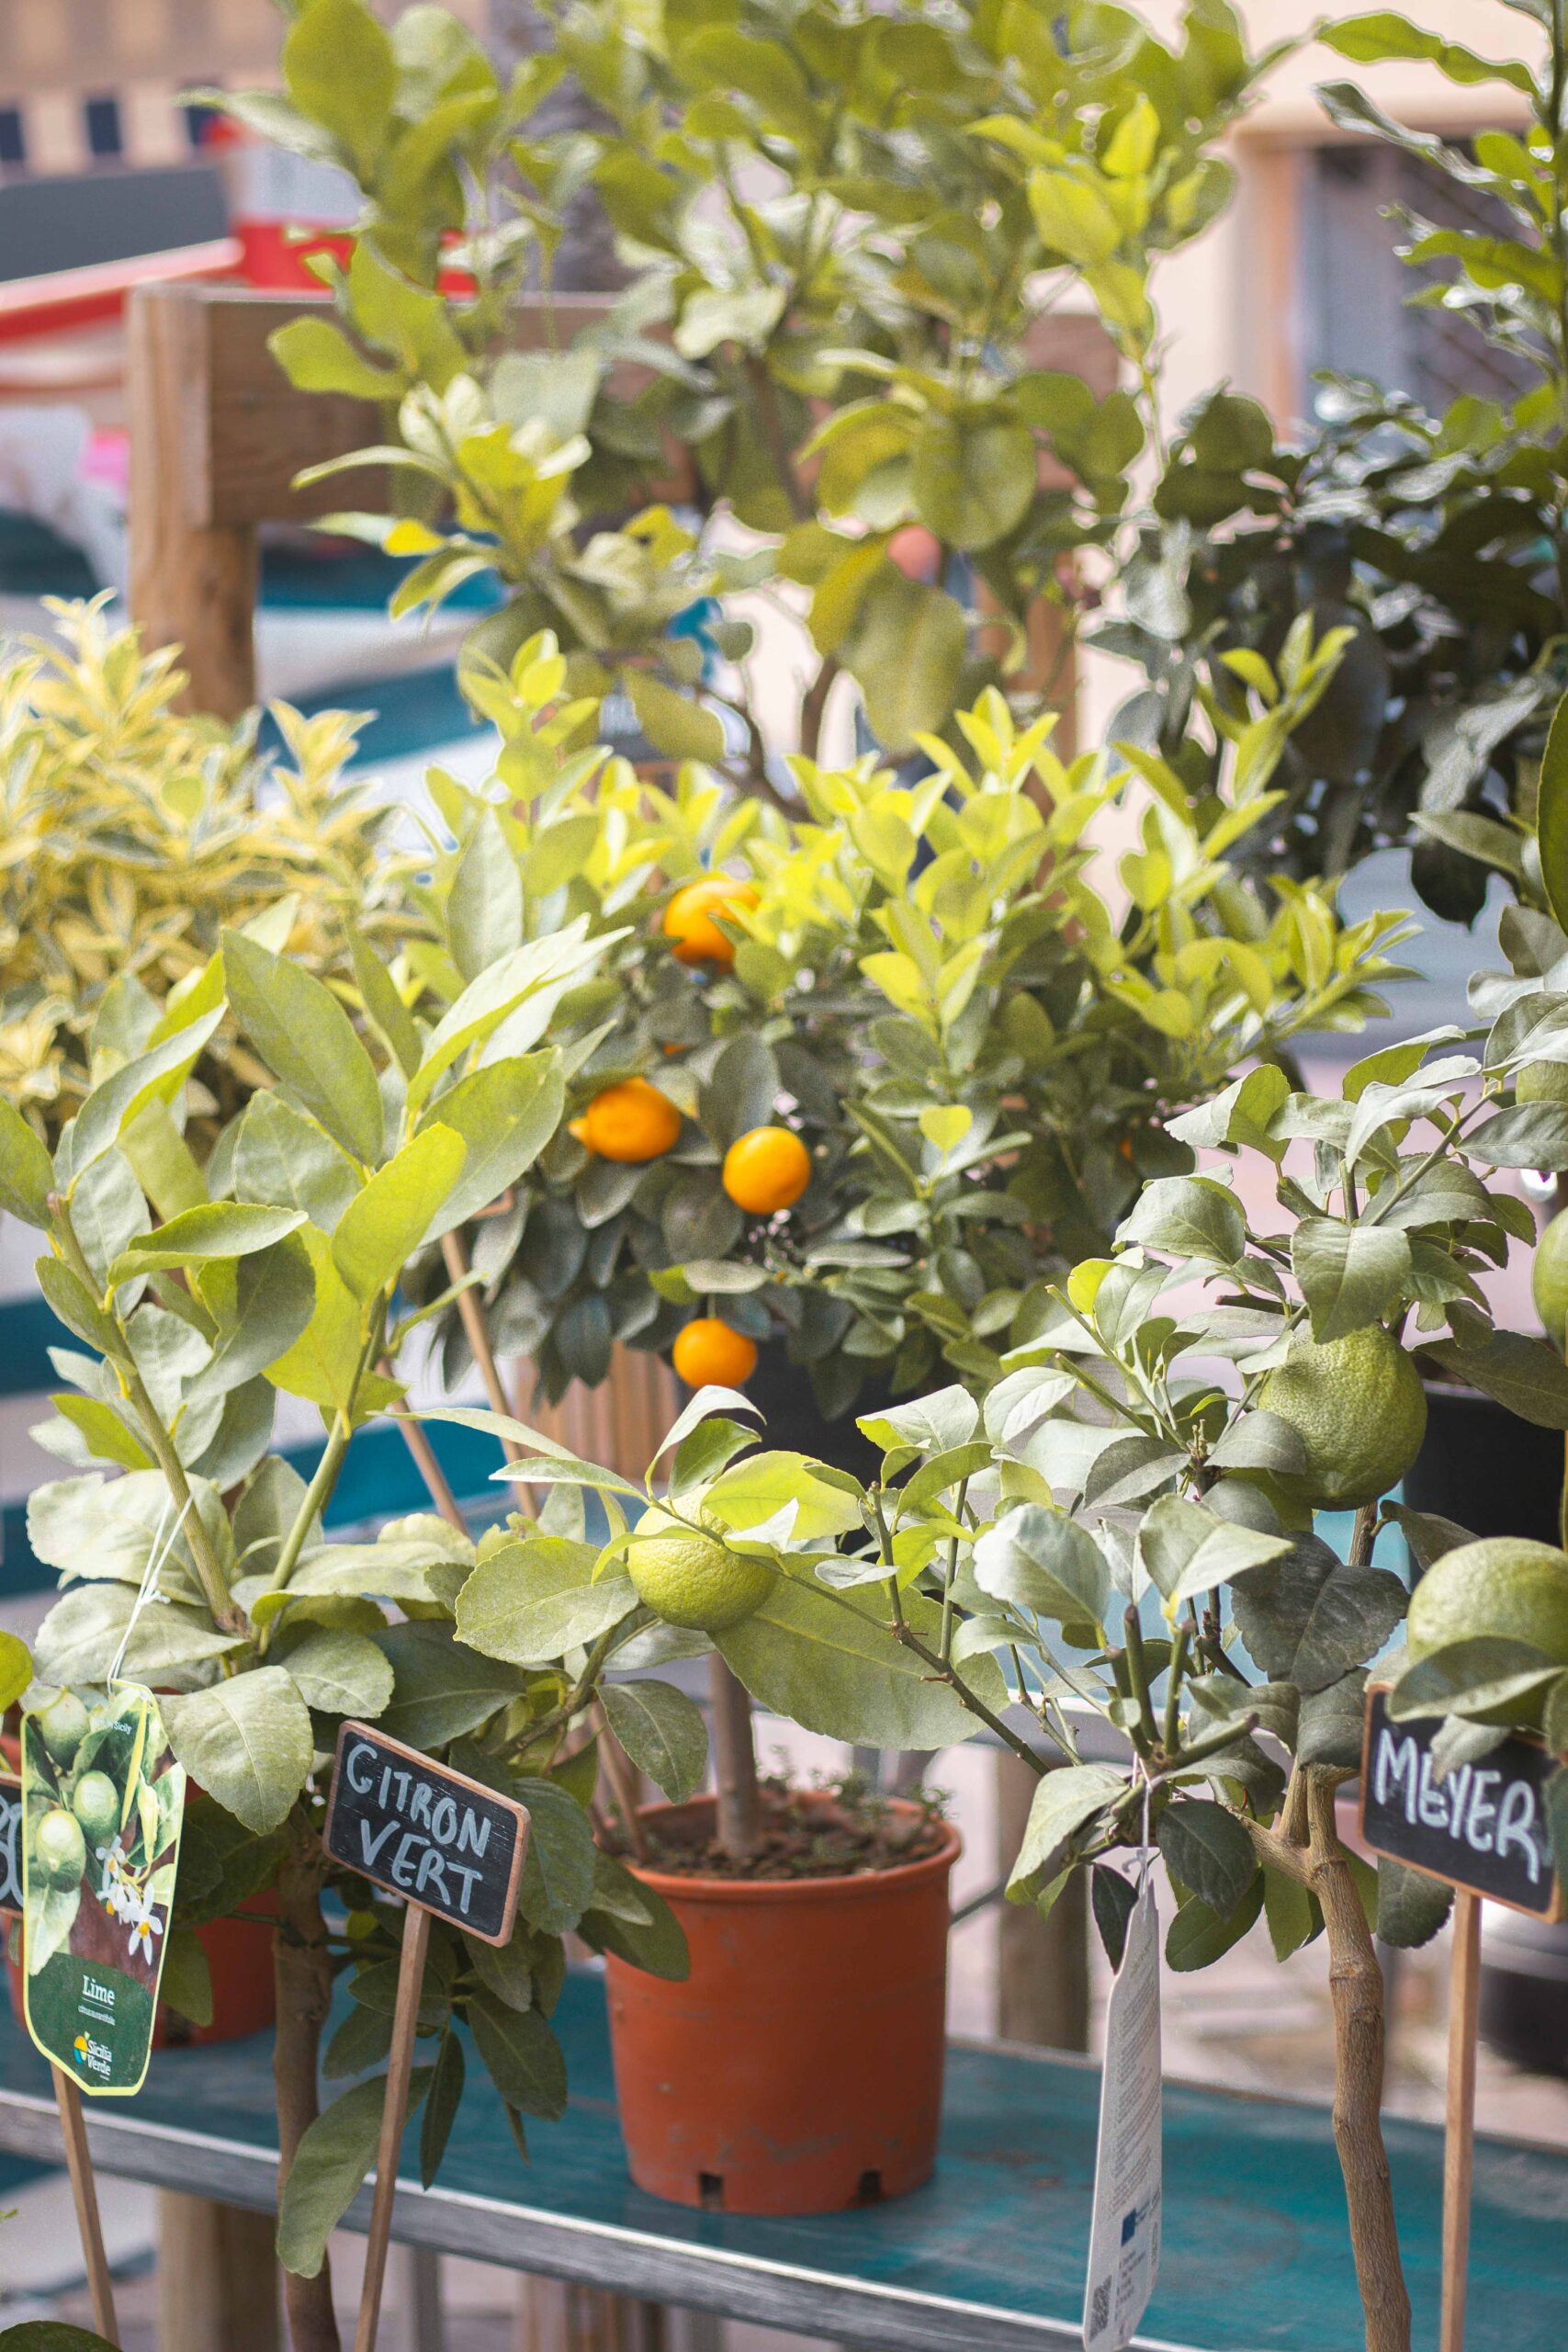 Details of a market stall selling tangerine and lemon trees at the Marché Aux Fleurs Cours Saleya in Nice, France